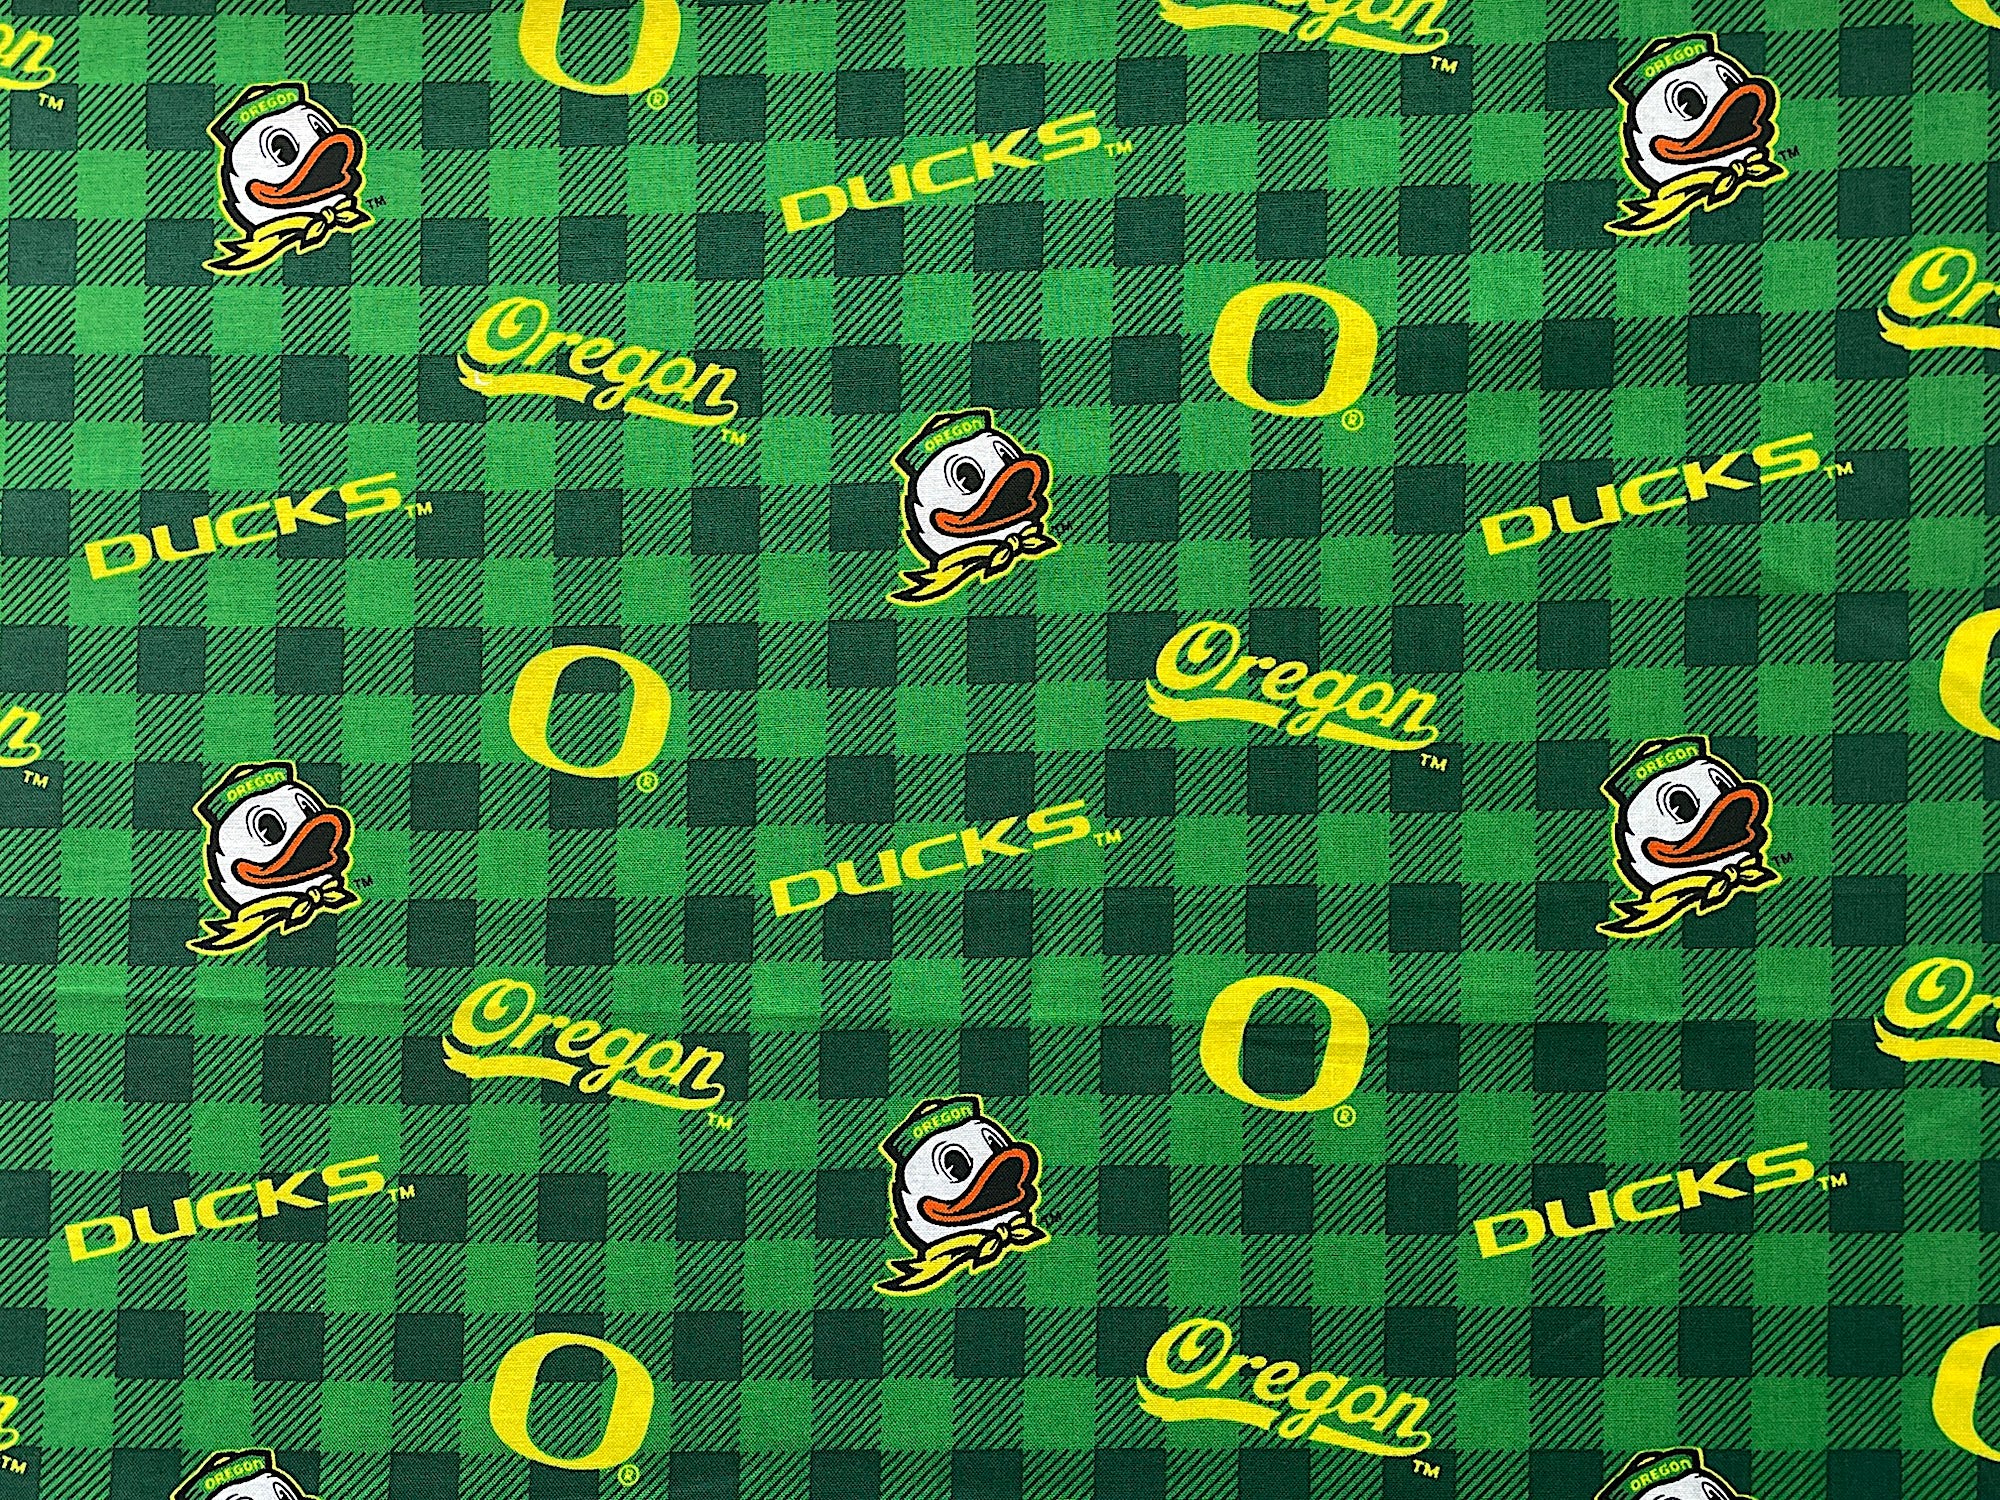 Plaid green fabric covered with Oregon ducks.